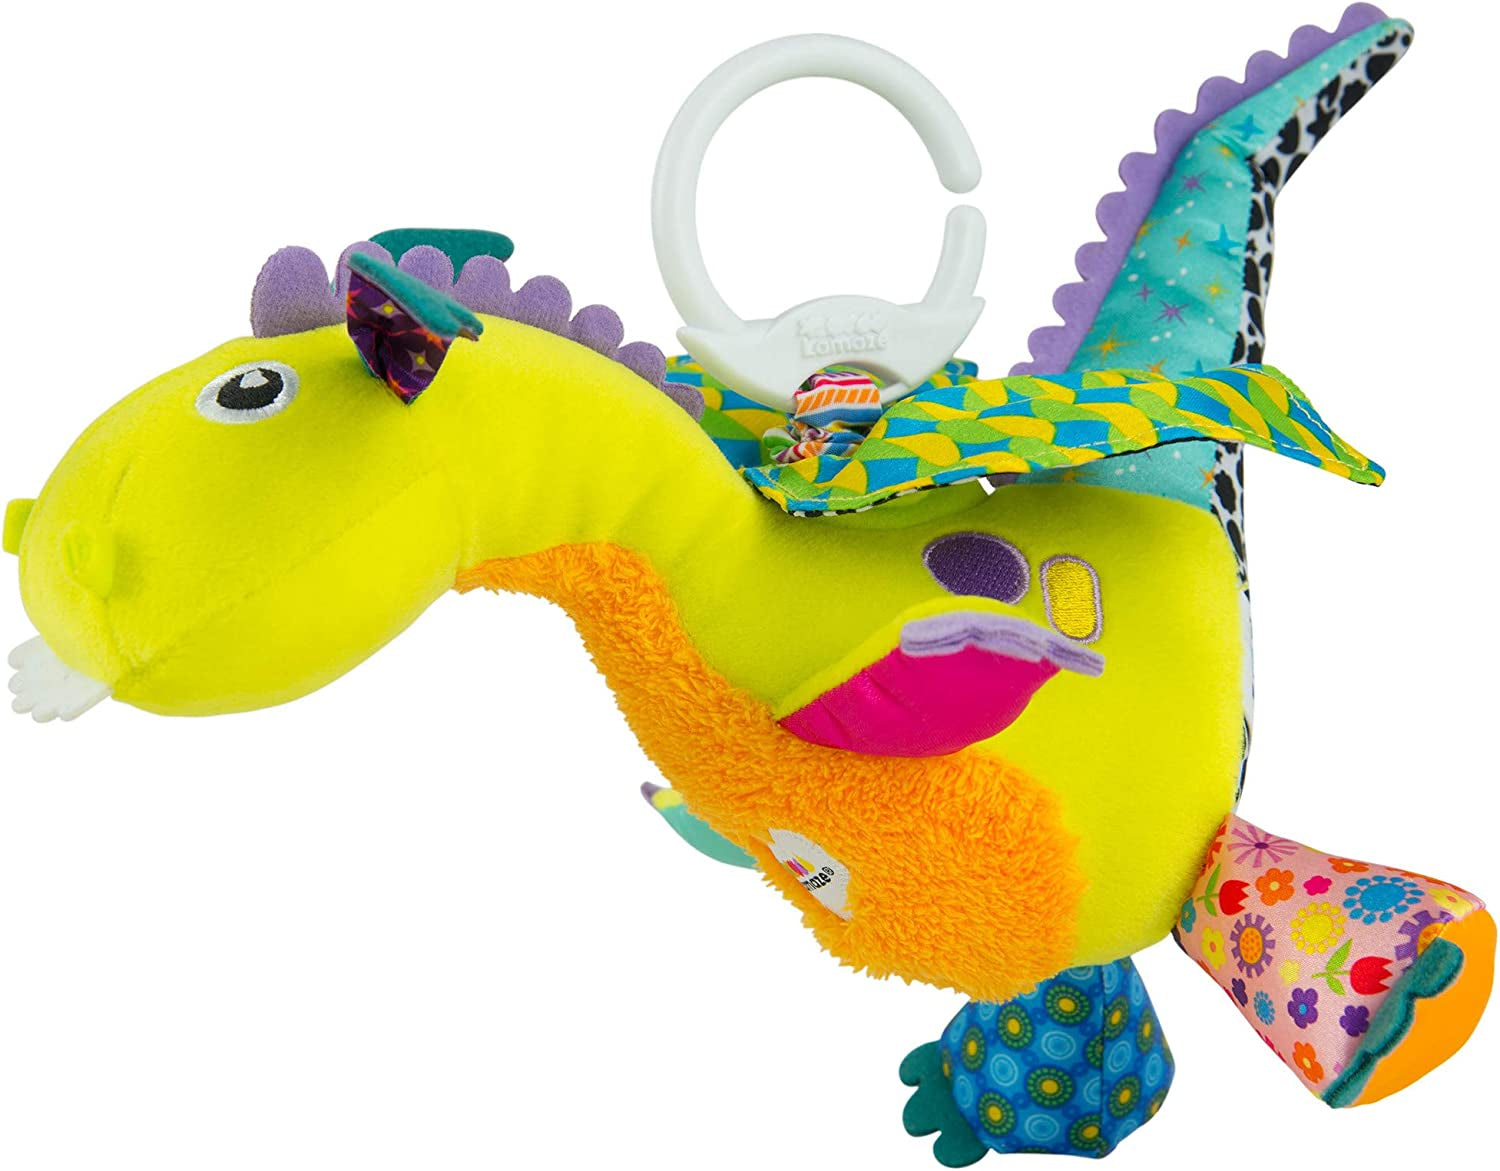 LAMAZE Flip Flap Dragon, Clip on Pram and Pushchair Newborn Baby Toy, Sensory Toy for Babies Boys and Girls from 0 to 6 Months